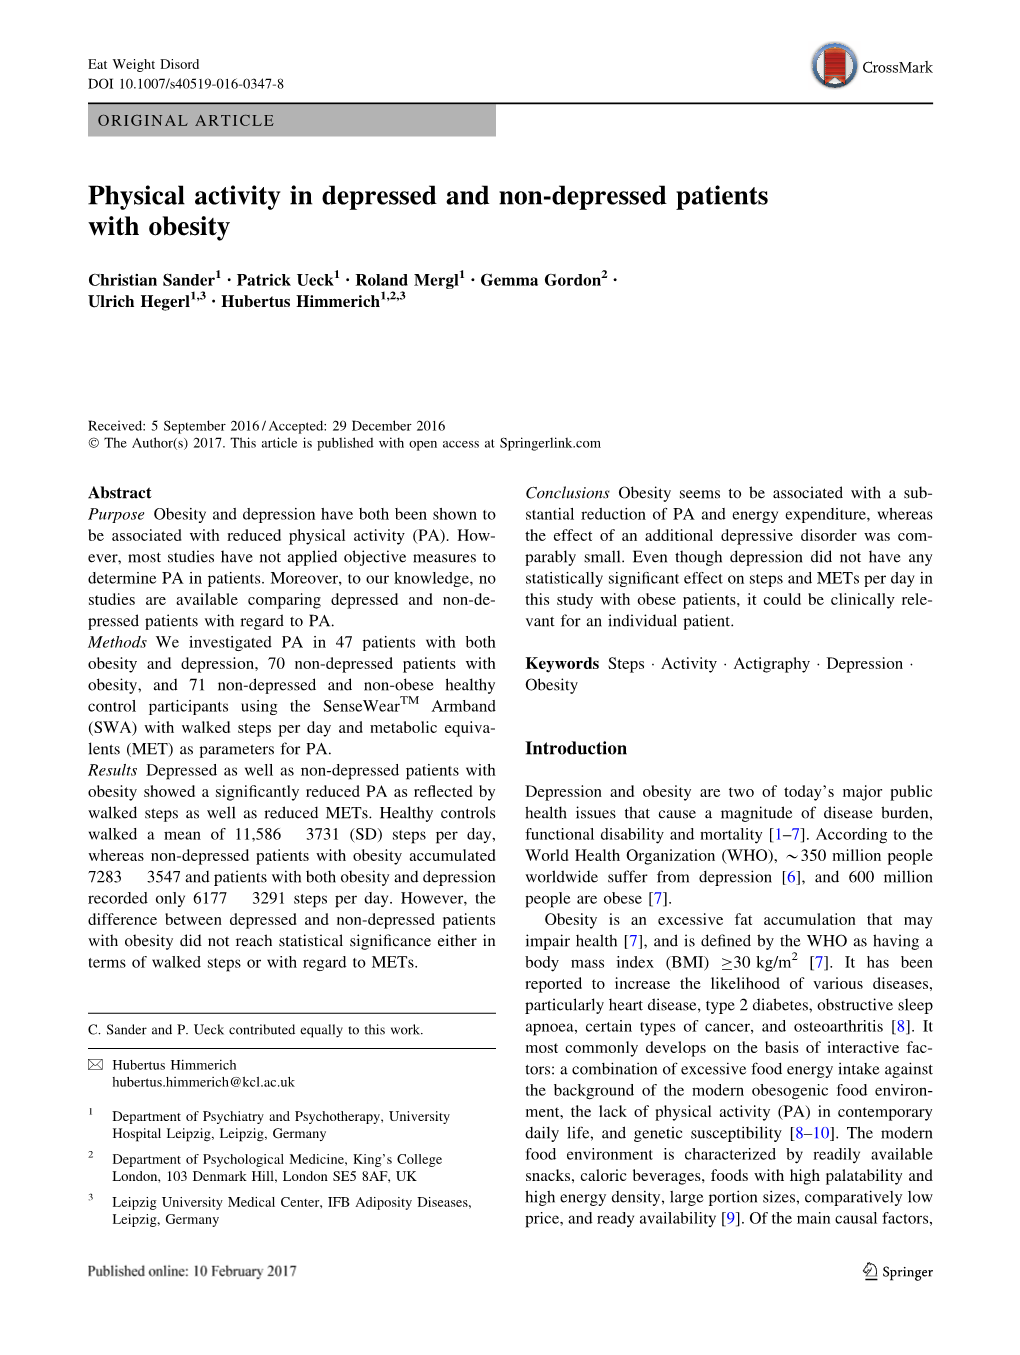 Physical Activity in Depressed and Non-Depressed Patients with Obesity